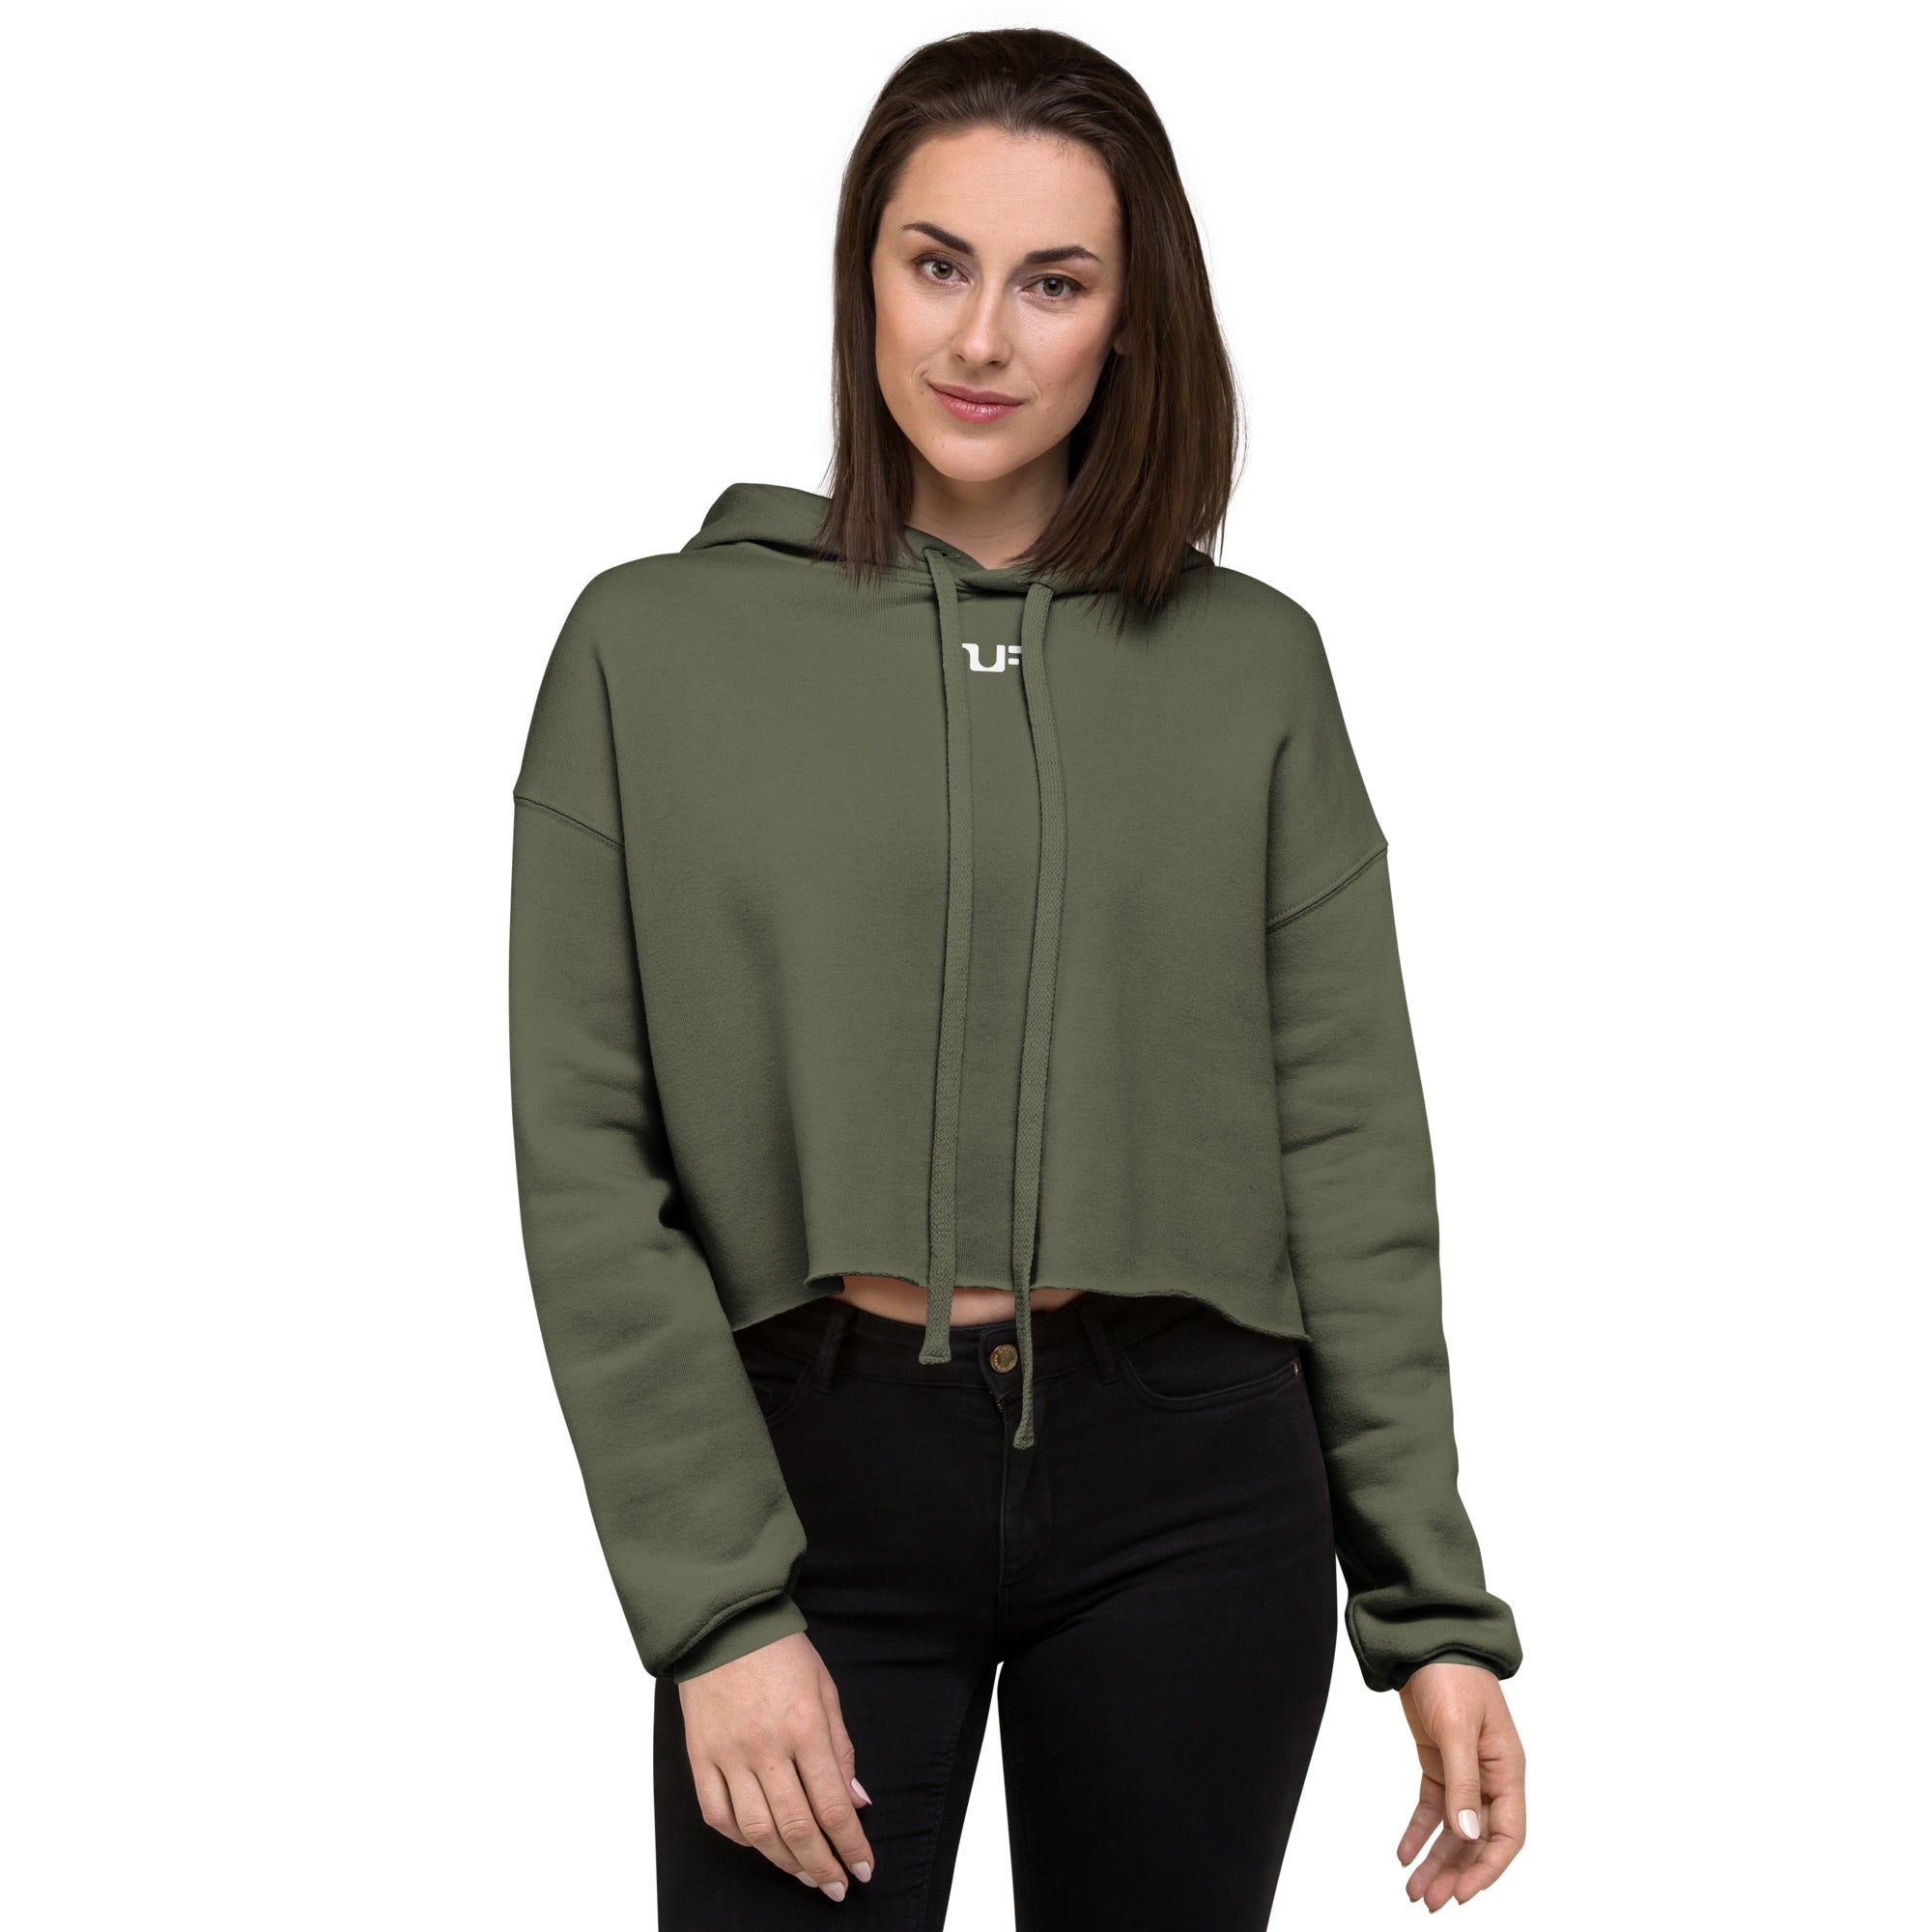 WOMEN'S HOODIE, CROPPED - MILITARY GREEN